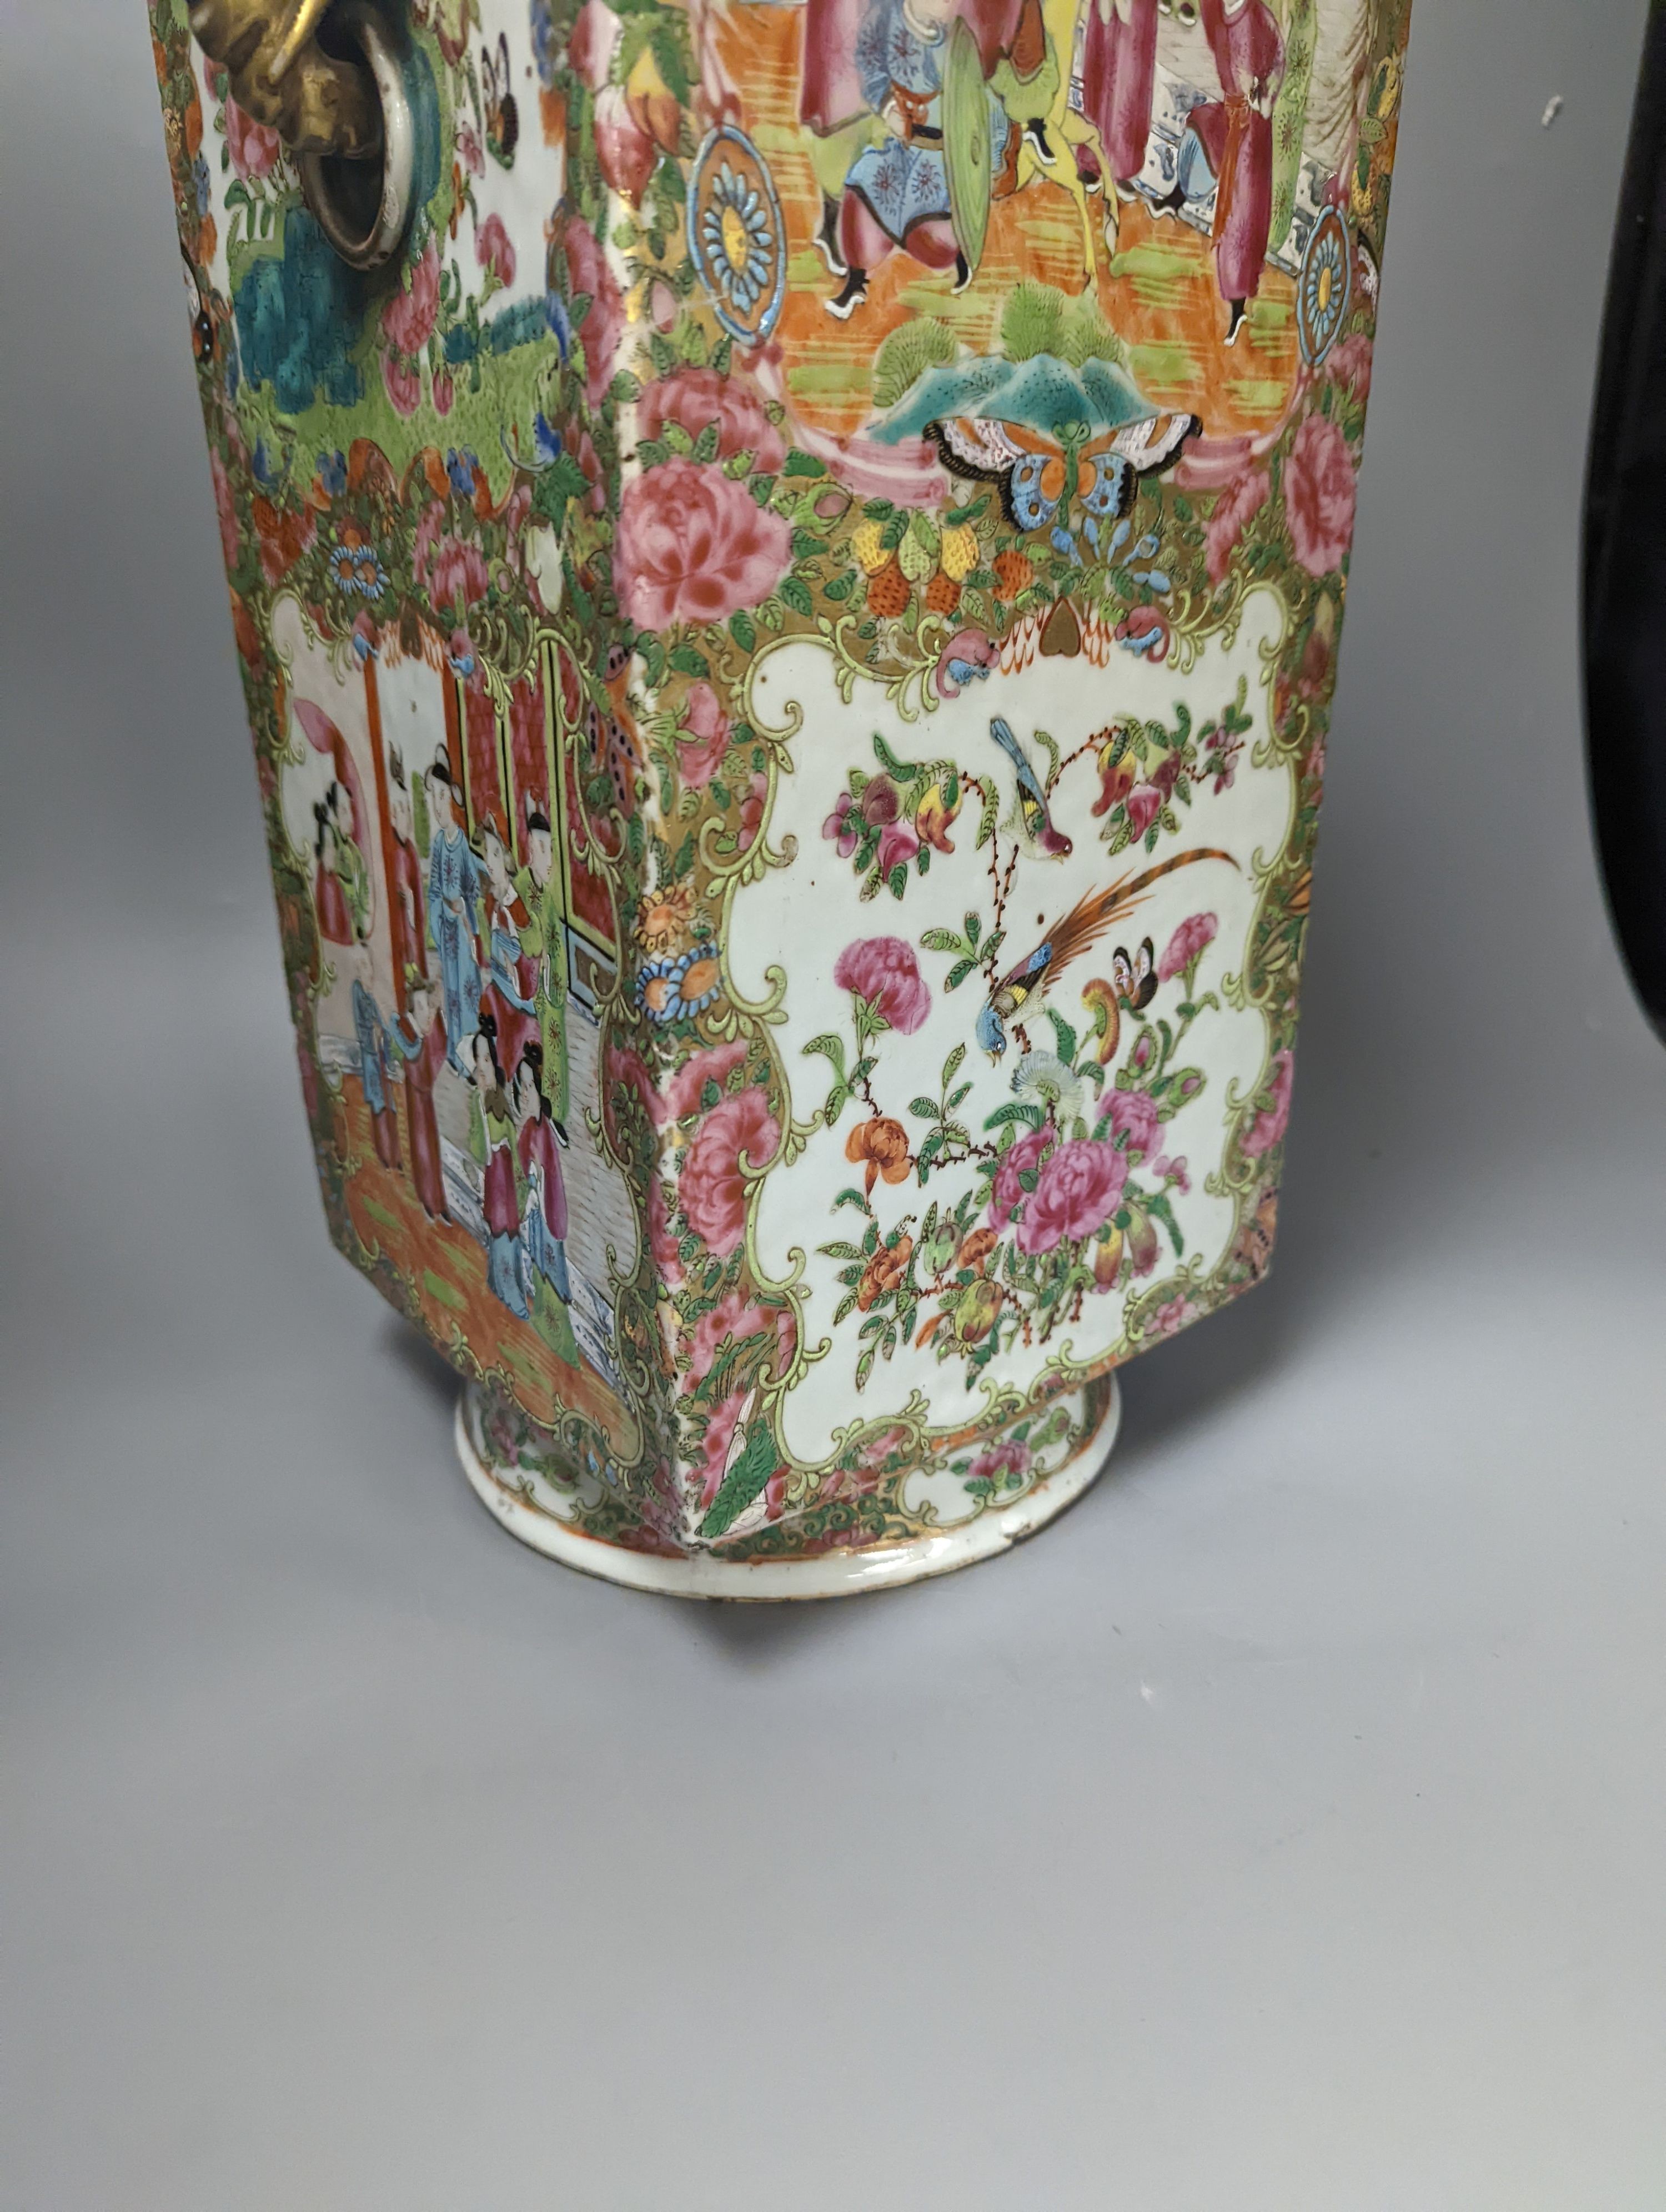 A large Chinese famille rose cong-shaped vase, 19th century, 50 cms high.